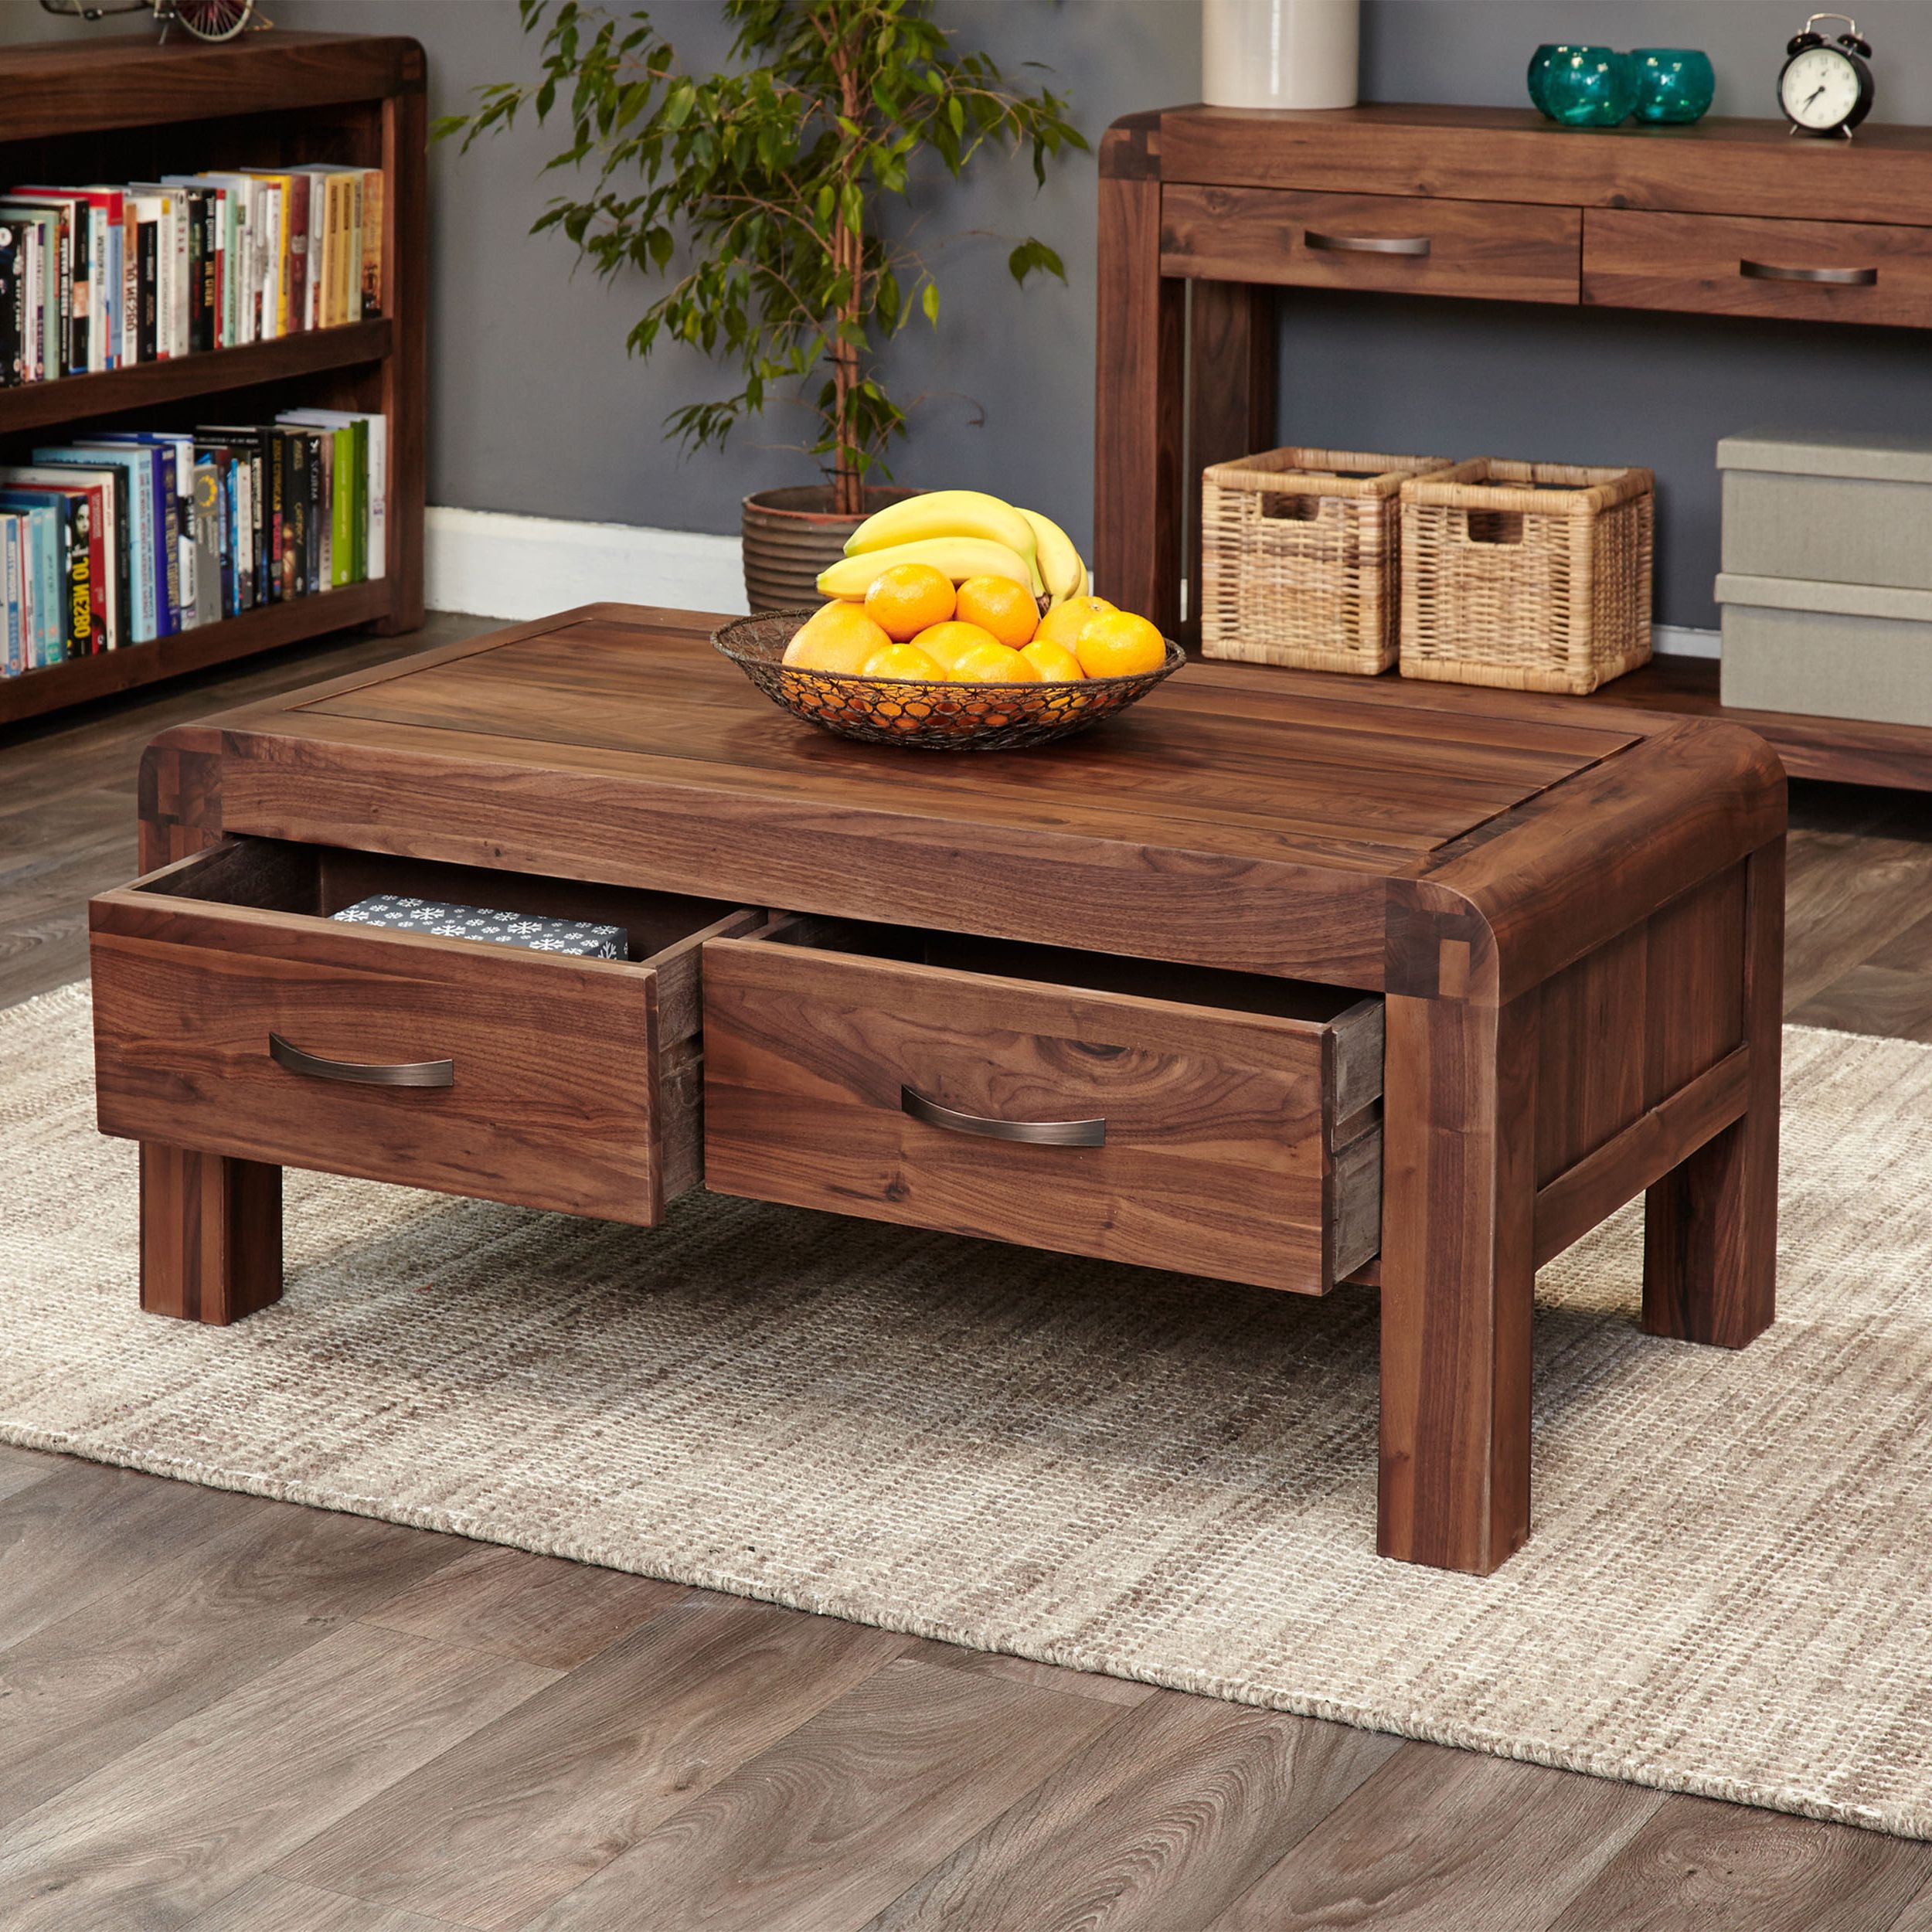 Store Intended For Well Known Black Wood Storage Coffee Tables (Gallery 2 of 20)